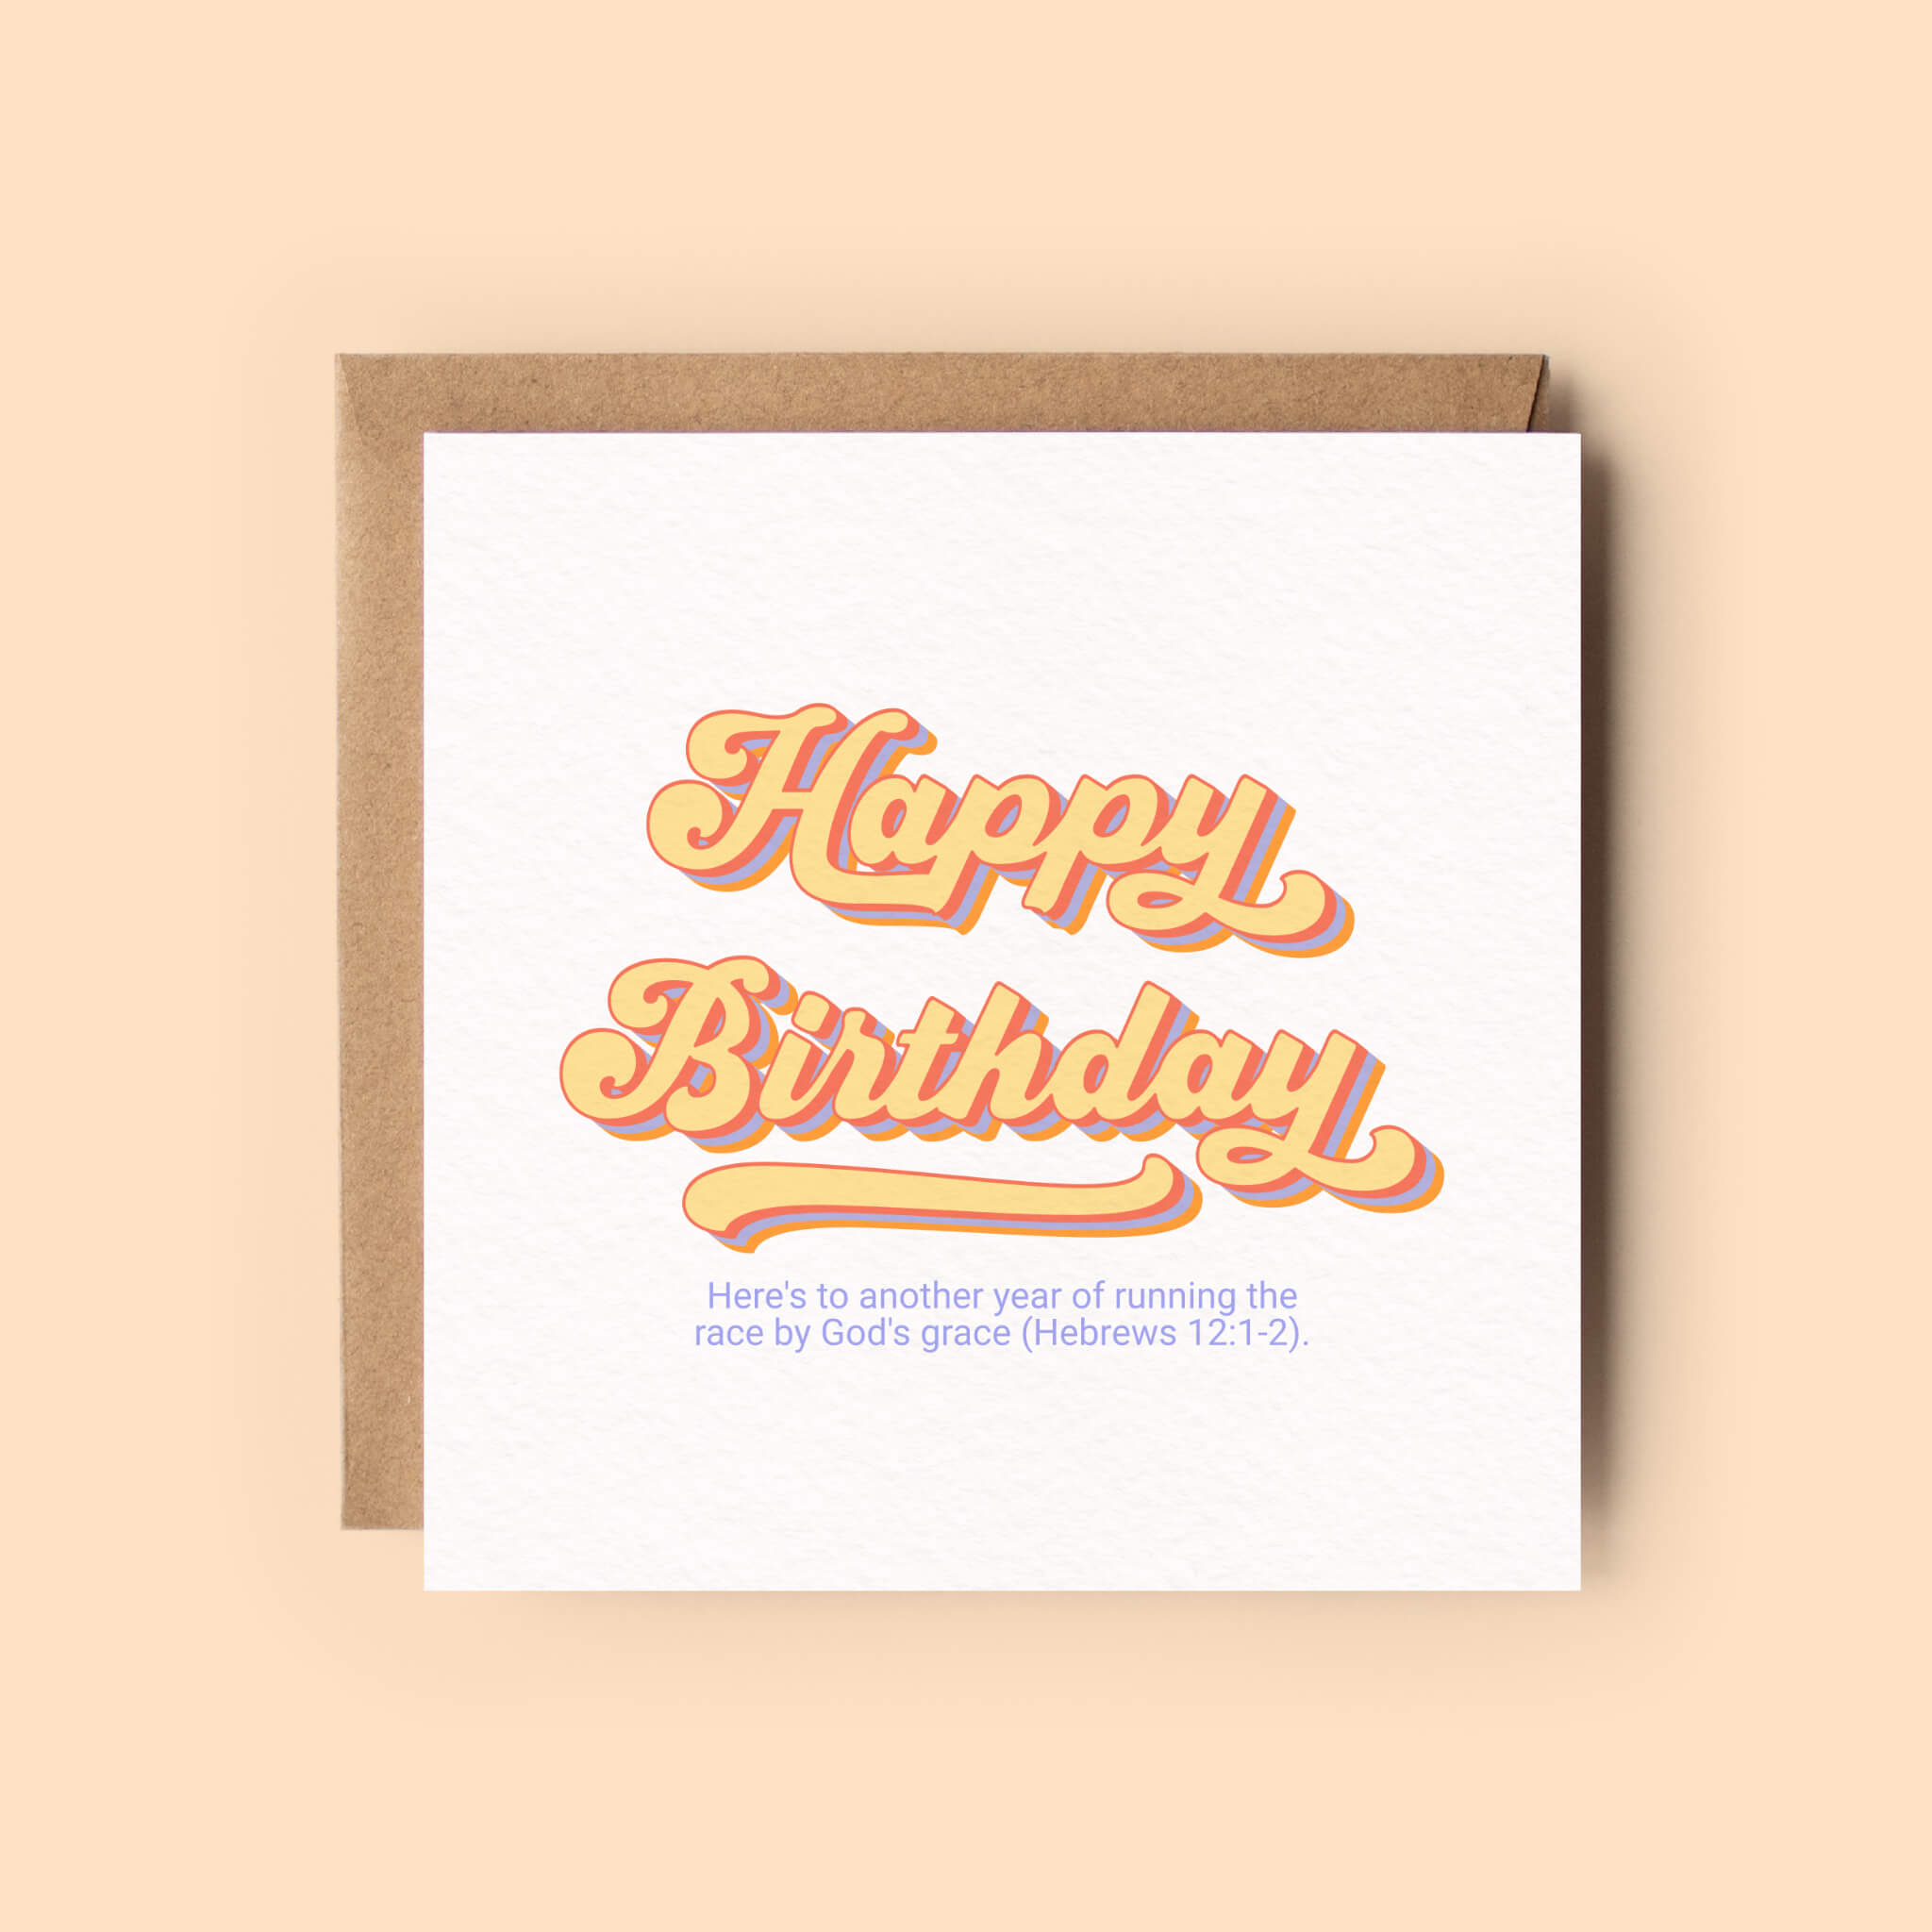 Colourful birthday card for Christian recipients with retro typography and uplifting message from the Bible